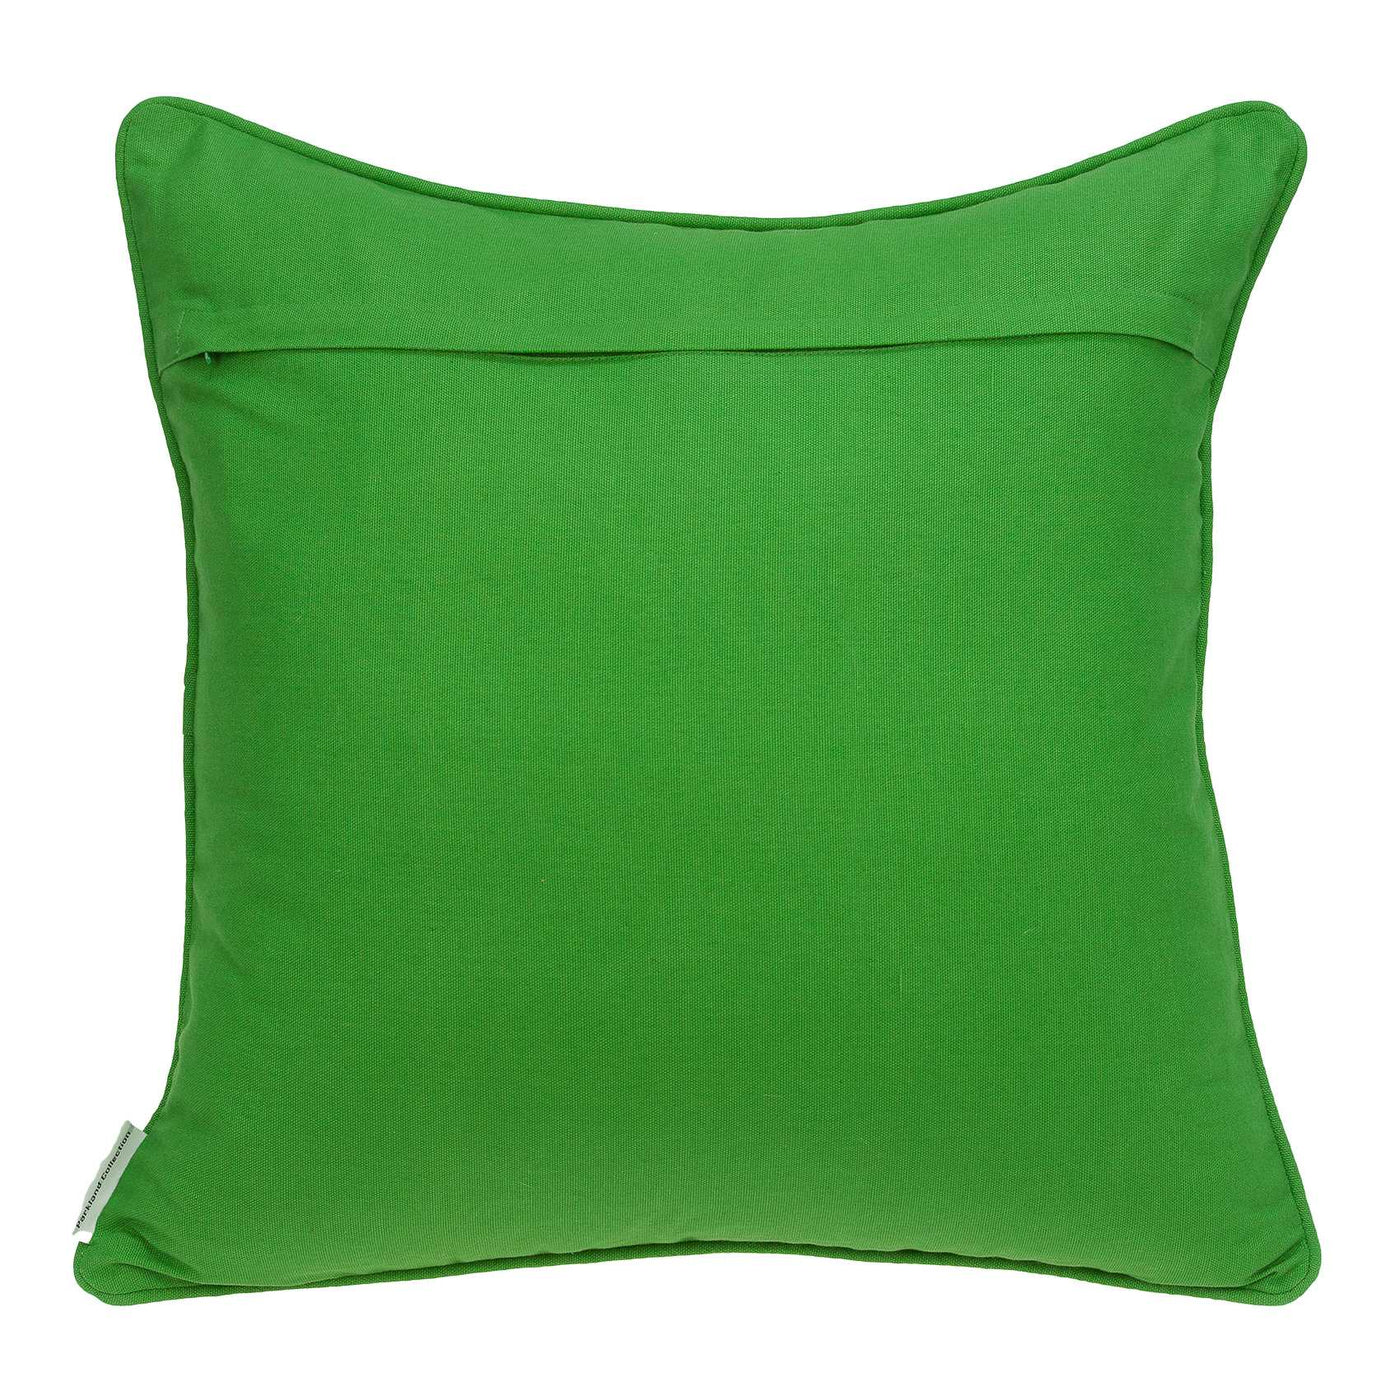 20’ X 7’ X 20’ Transitional Green And White Pillow Cover With Poly Insert - Accent Throw Pillows